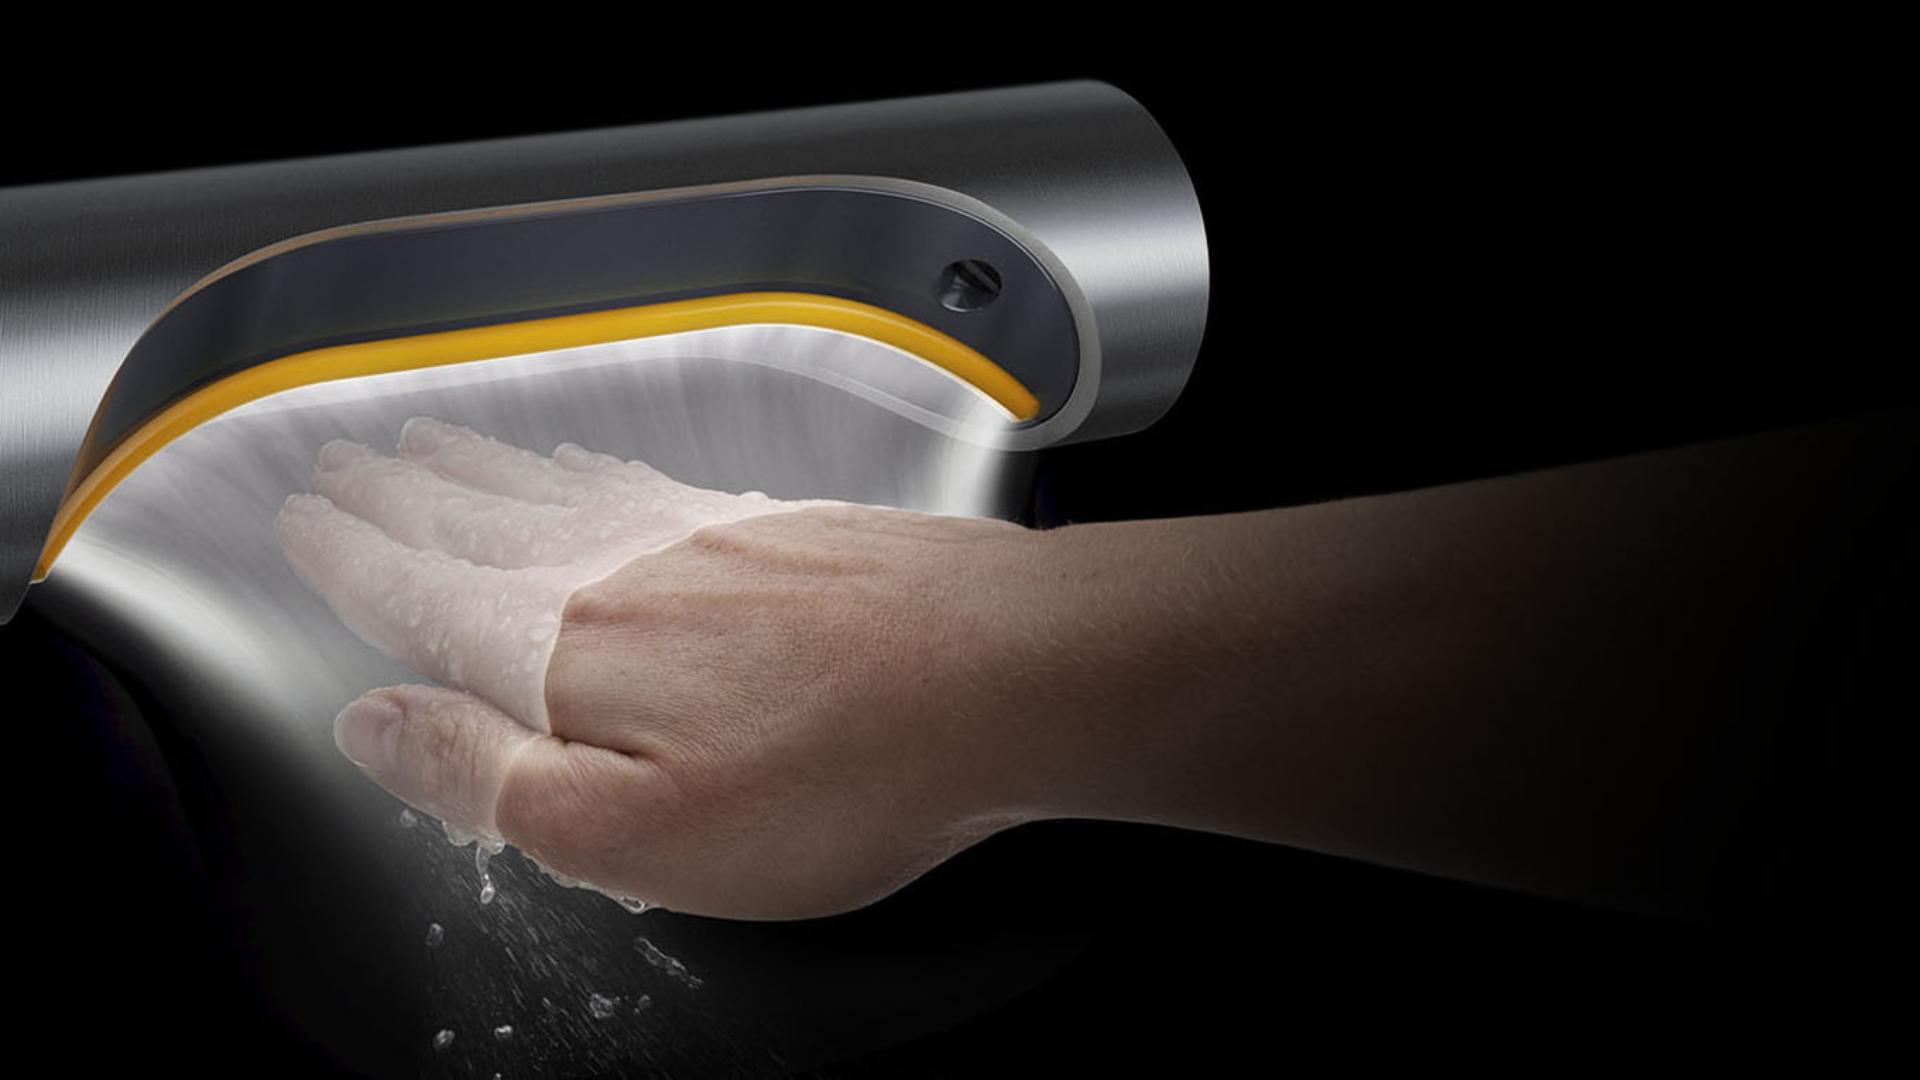 A hand held below a Dyson Airblade 9kJ hand dryer with an illustration to show how the air is propelled along the surface of the hand.